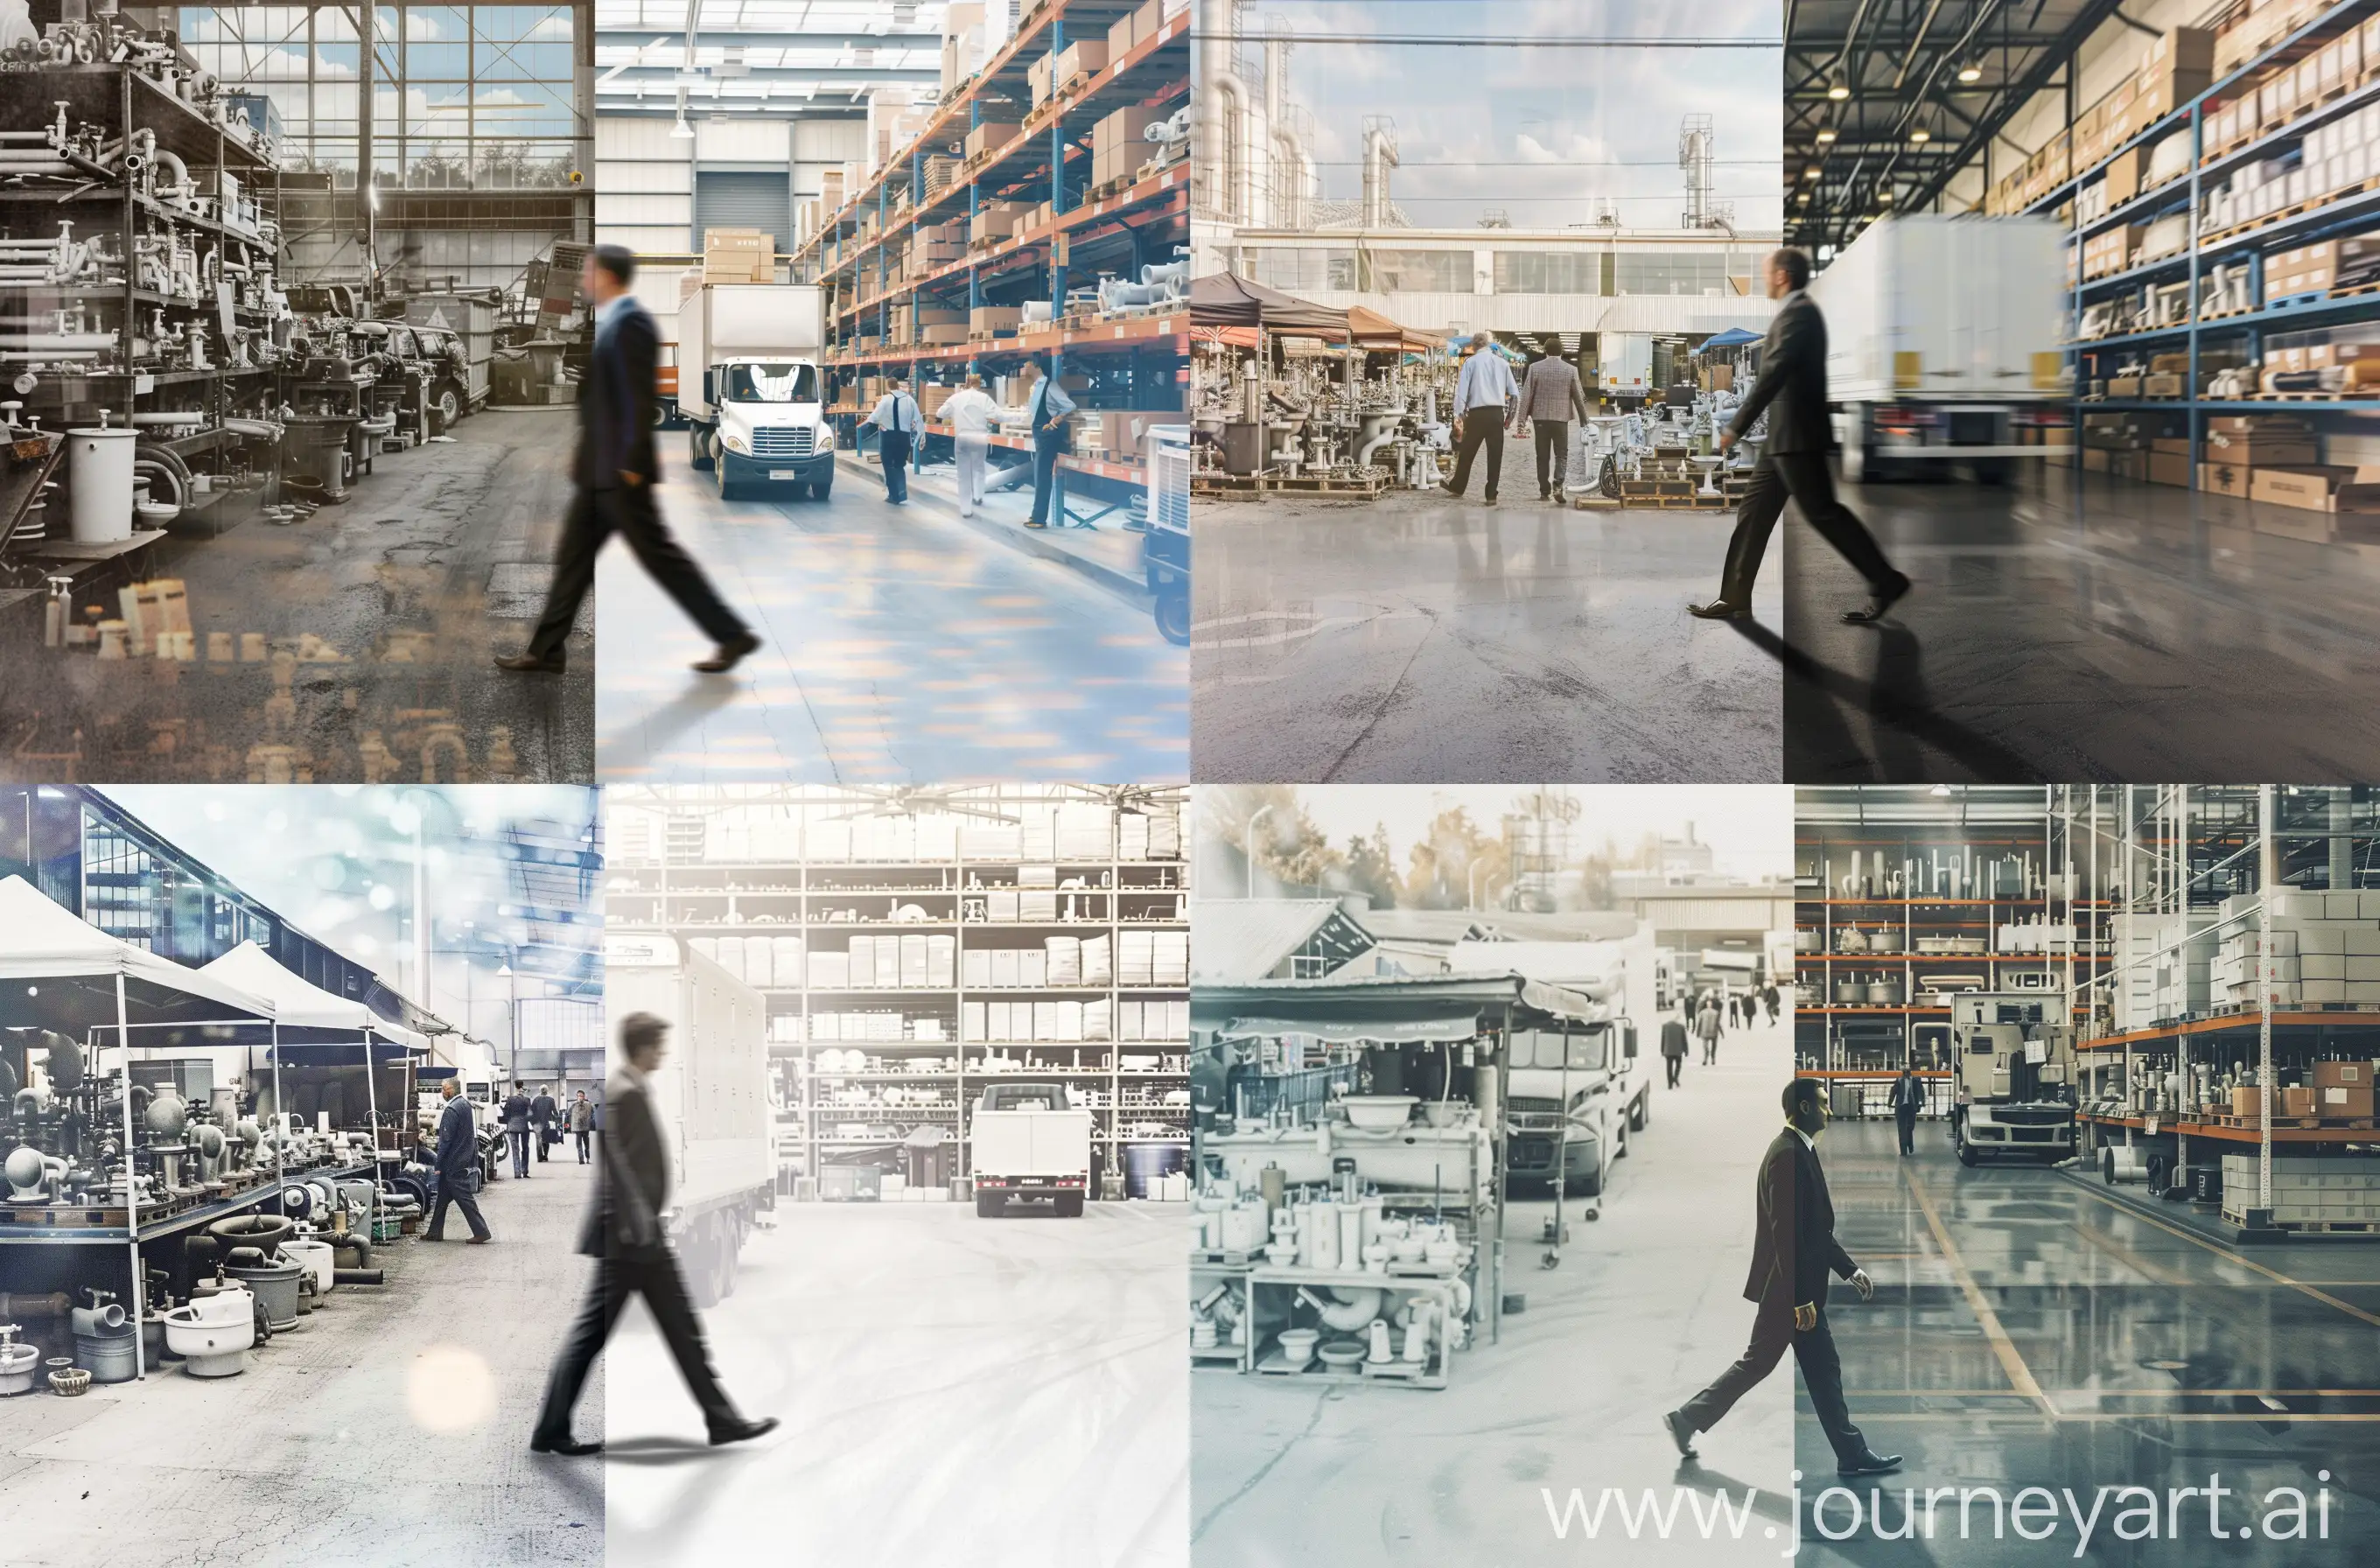 "The image is smoothly divided vertically into two parts. A man in a suit is walking from left to right in the center, crossing this border. The transition between the parts is smooth, blurred in the background, and the man in the suit is in the foreground. To the left, a flea market is shown where sellers are selling old plumbing. To the right is a warehouse with a view from inside the building, an automated new white plumbing warehouse inside, surrounded by shelves, where all the new plumbing goods are neatly arranged, the floor is clean, and a truck is unloading to the warehouse where employees are carrying boxes --ar 62:41